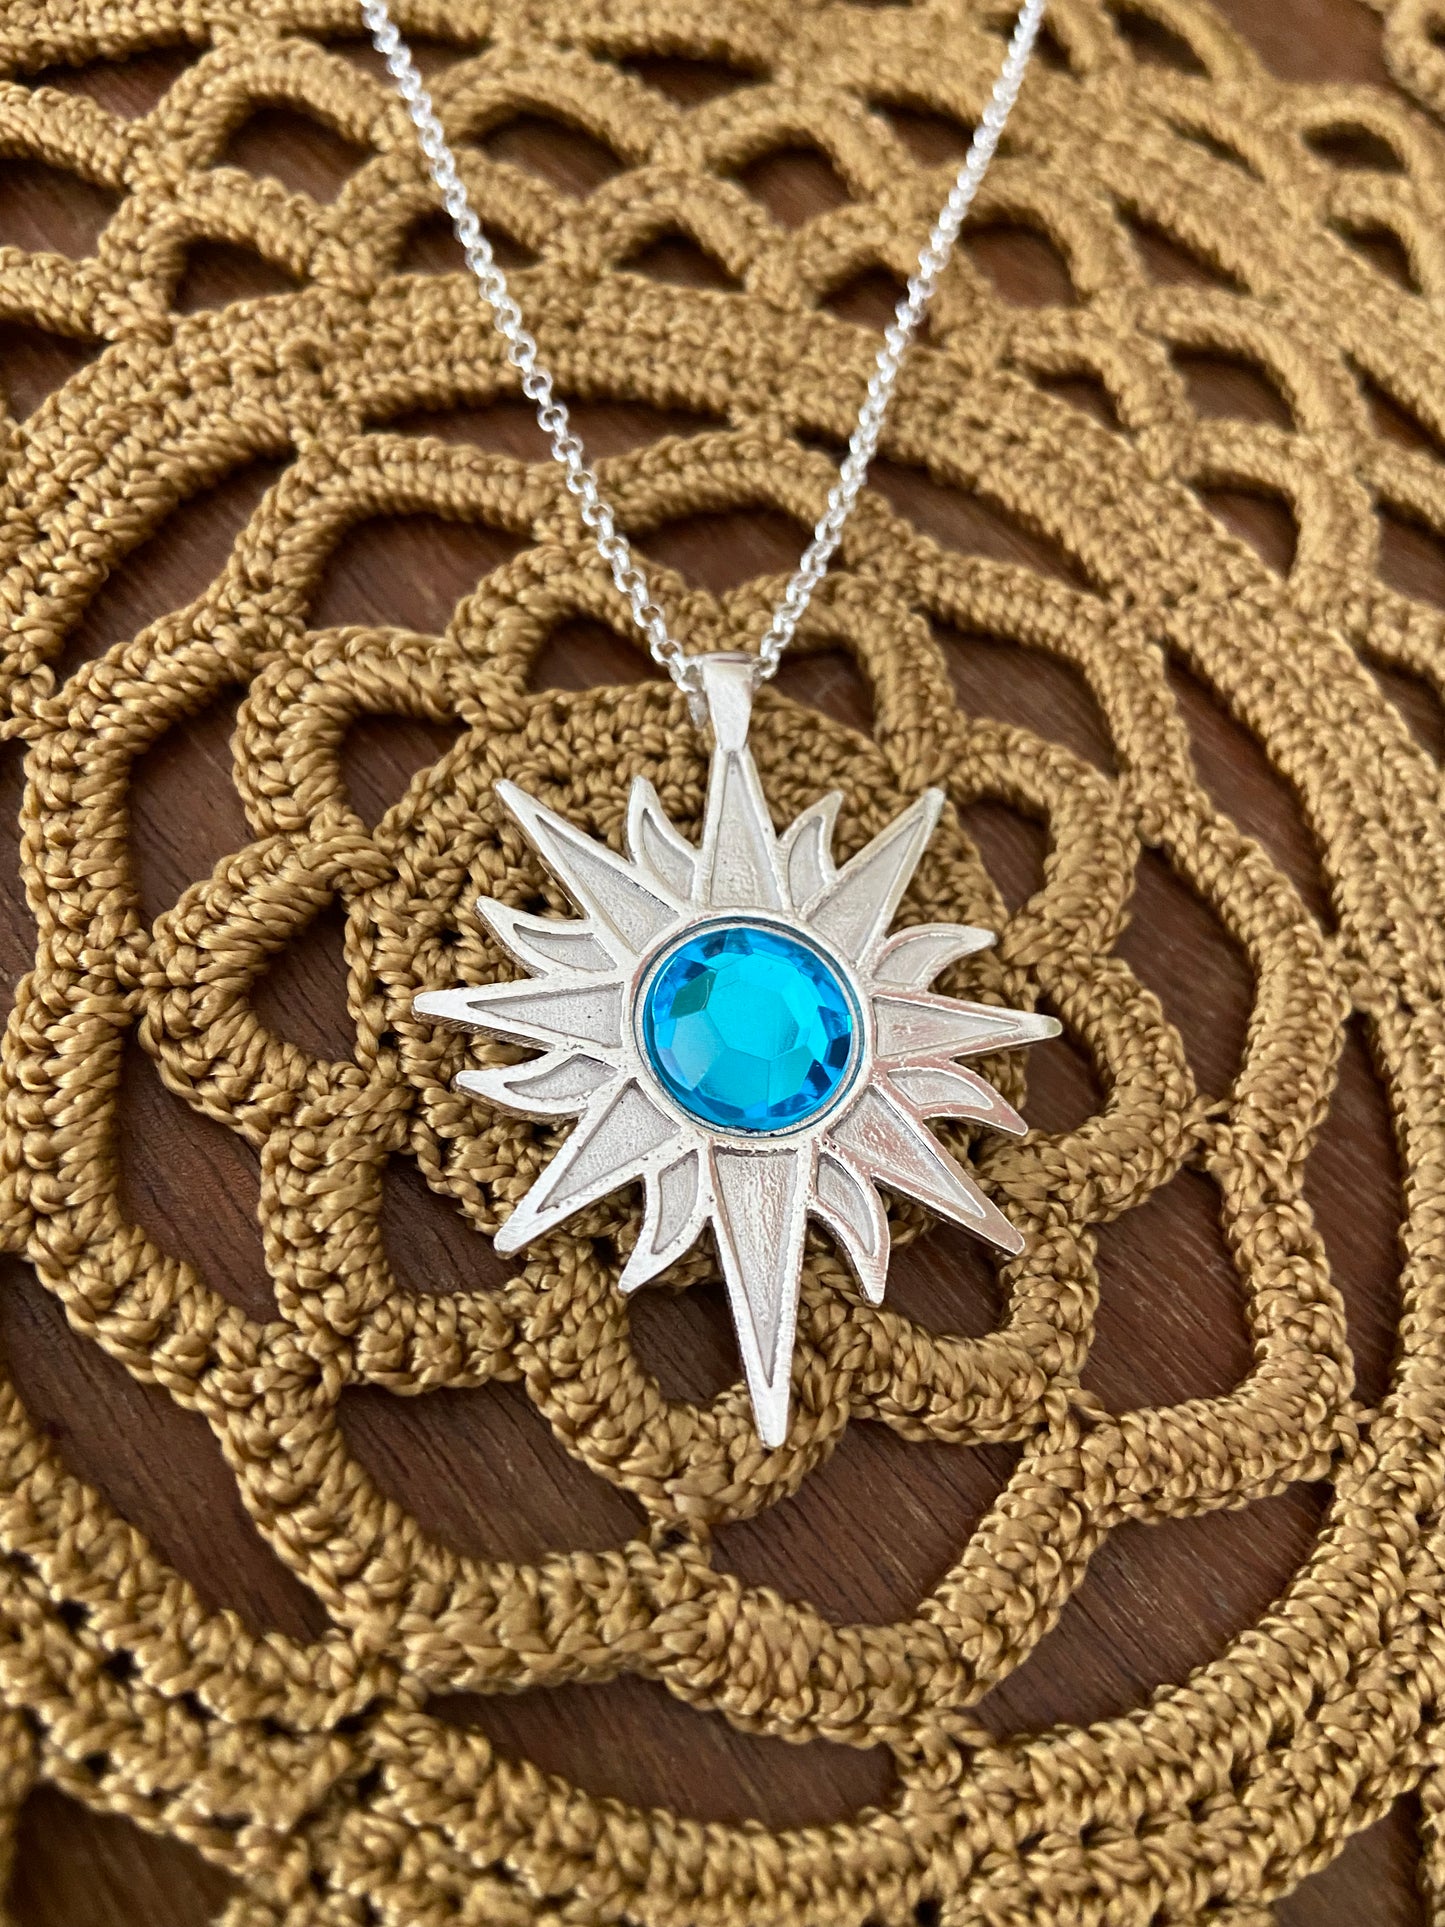 Sterling Silver Handmade Bright finish Twitches Sun Pendant “Twitches 15 year anniversary edition”